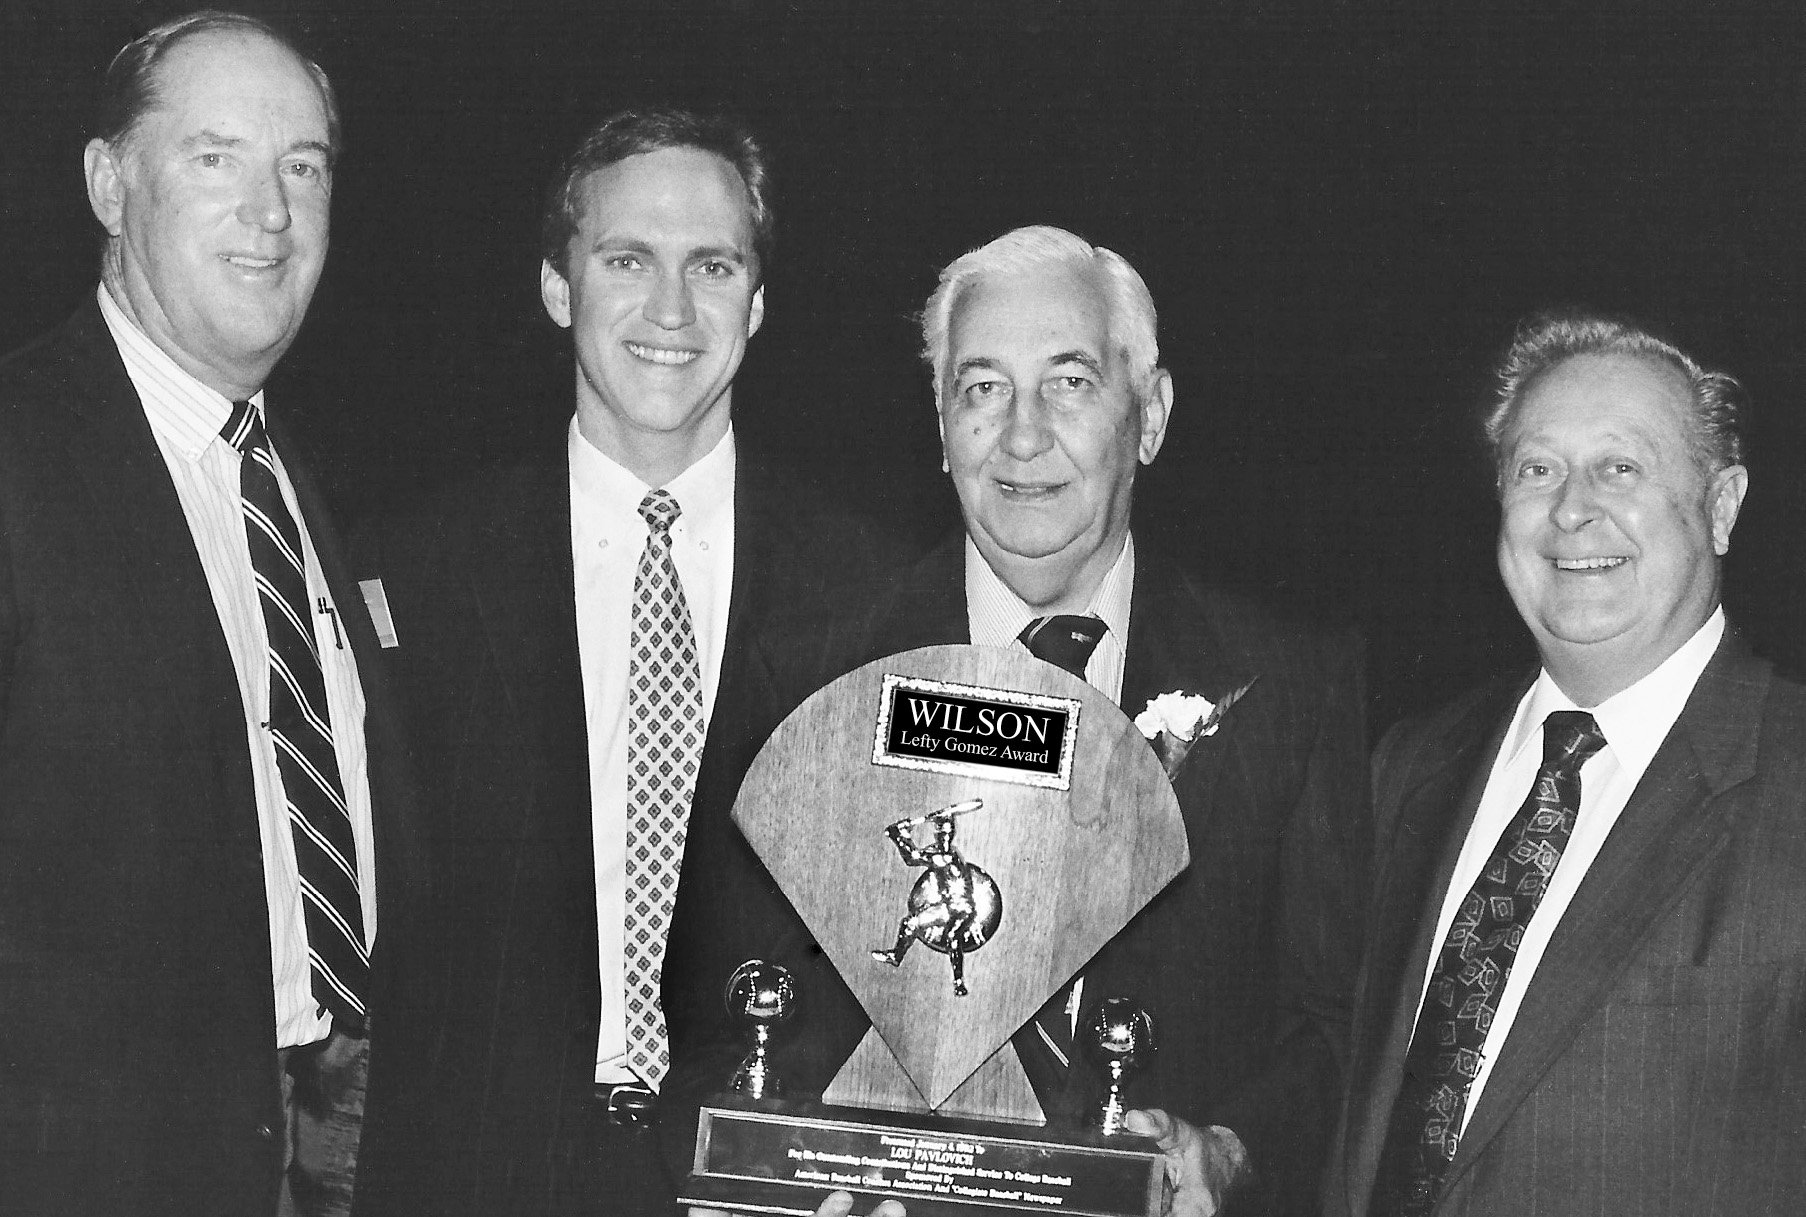 Lou Pavlovich at 1992 ABCA Convention being presented the ABCA/Wilson Lefty Gomez Award